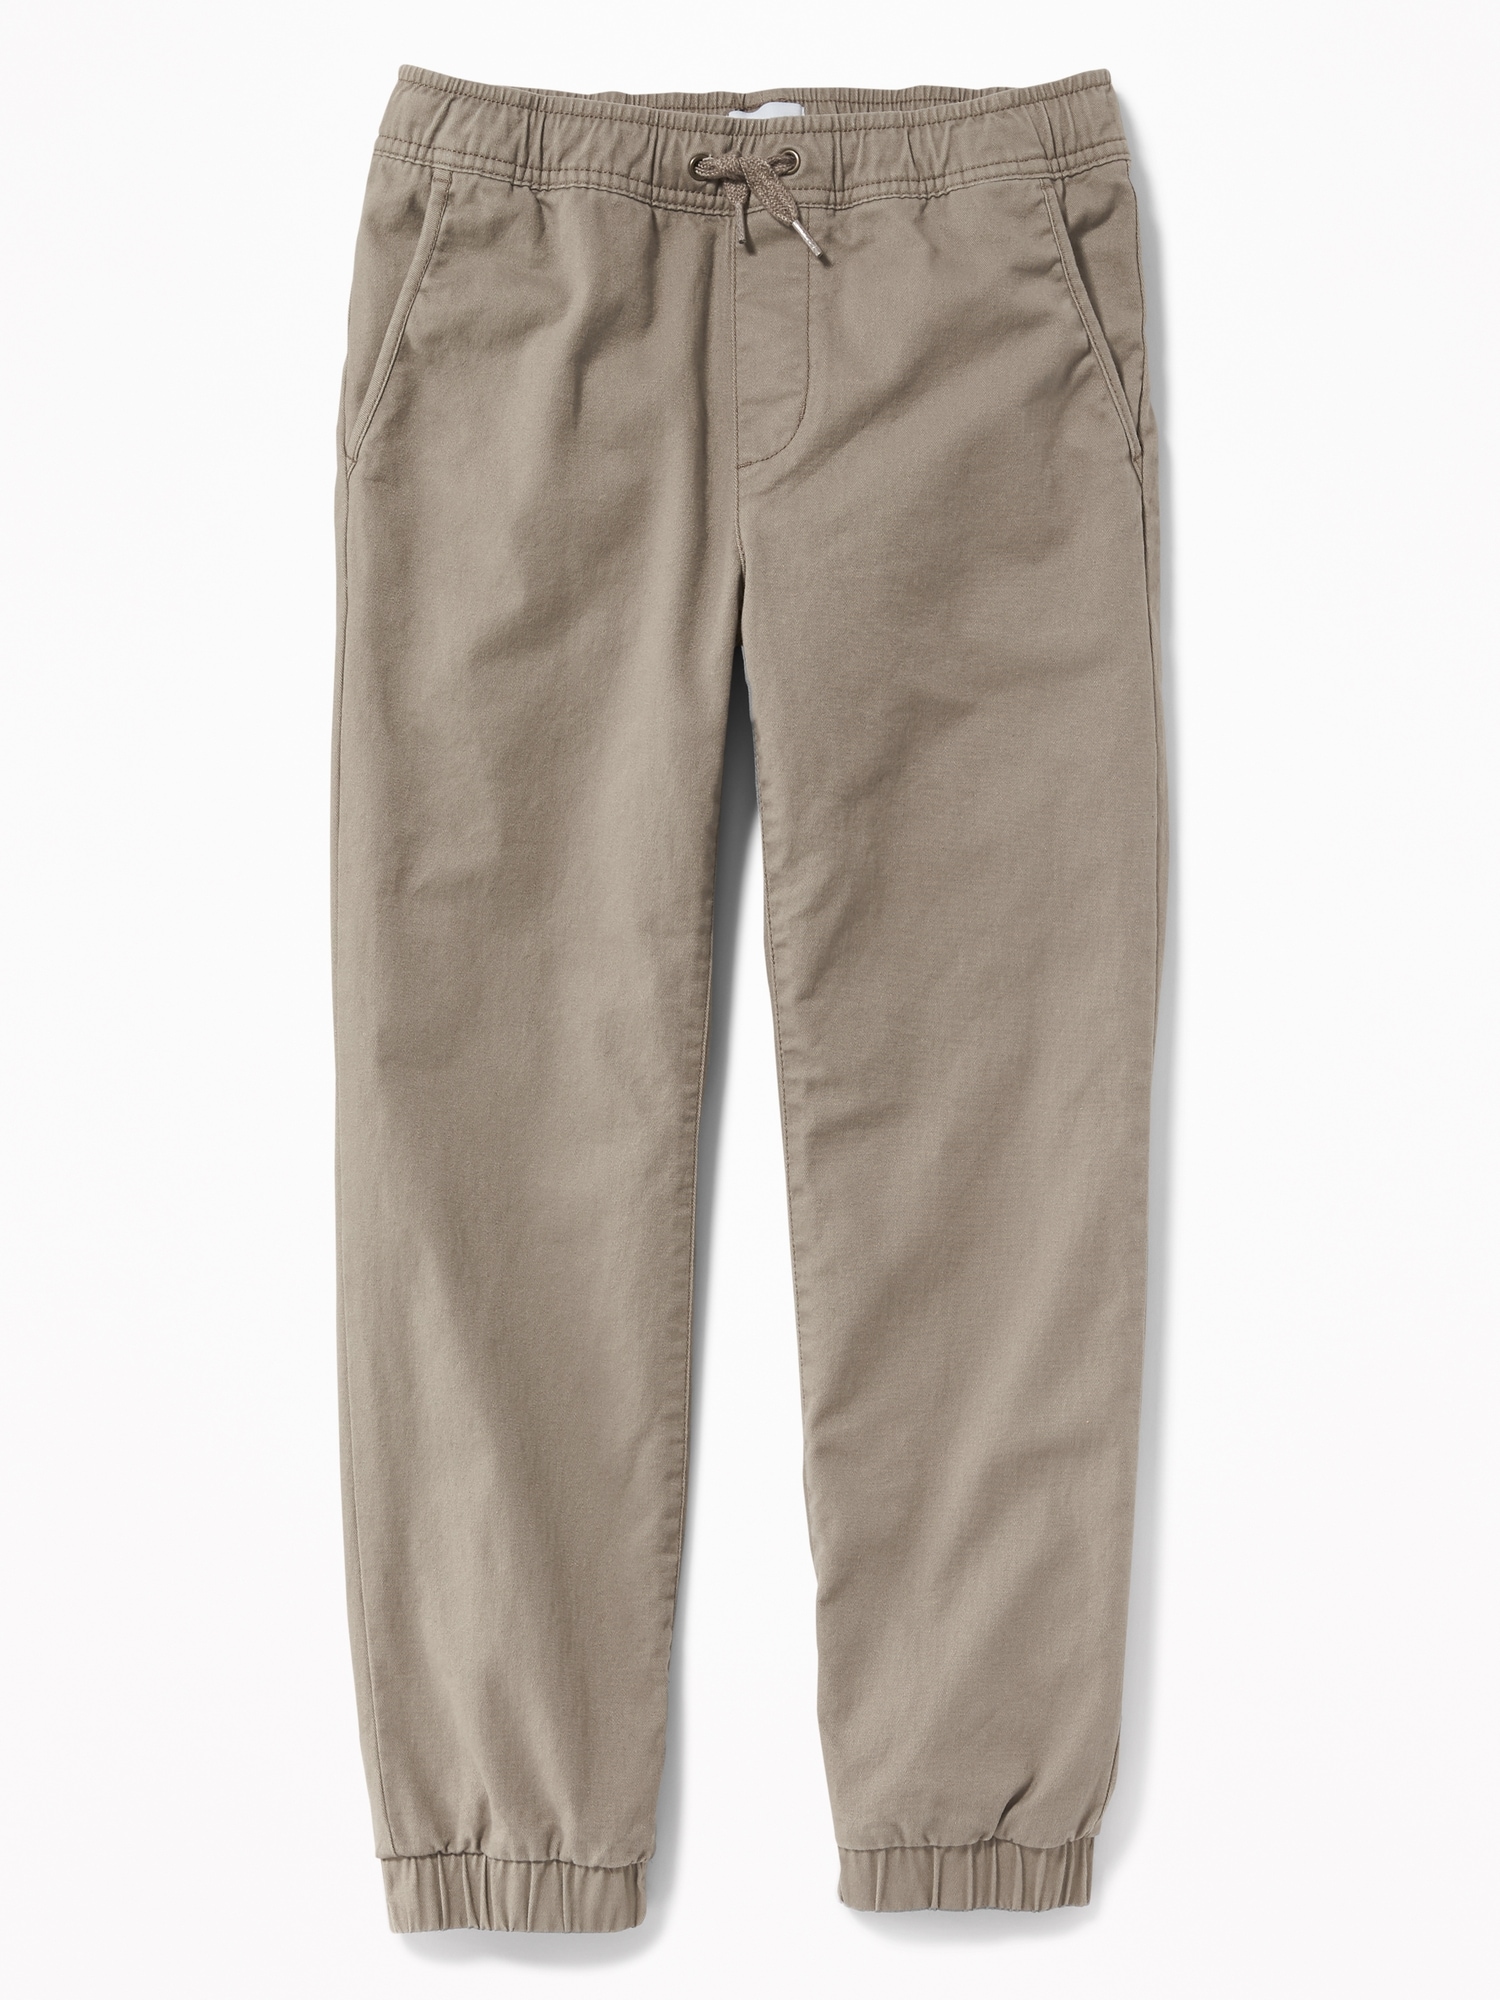 Built-In-Flex Twill Joggers For Boys